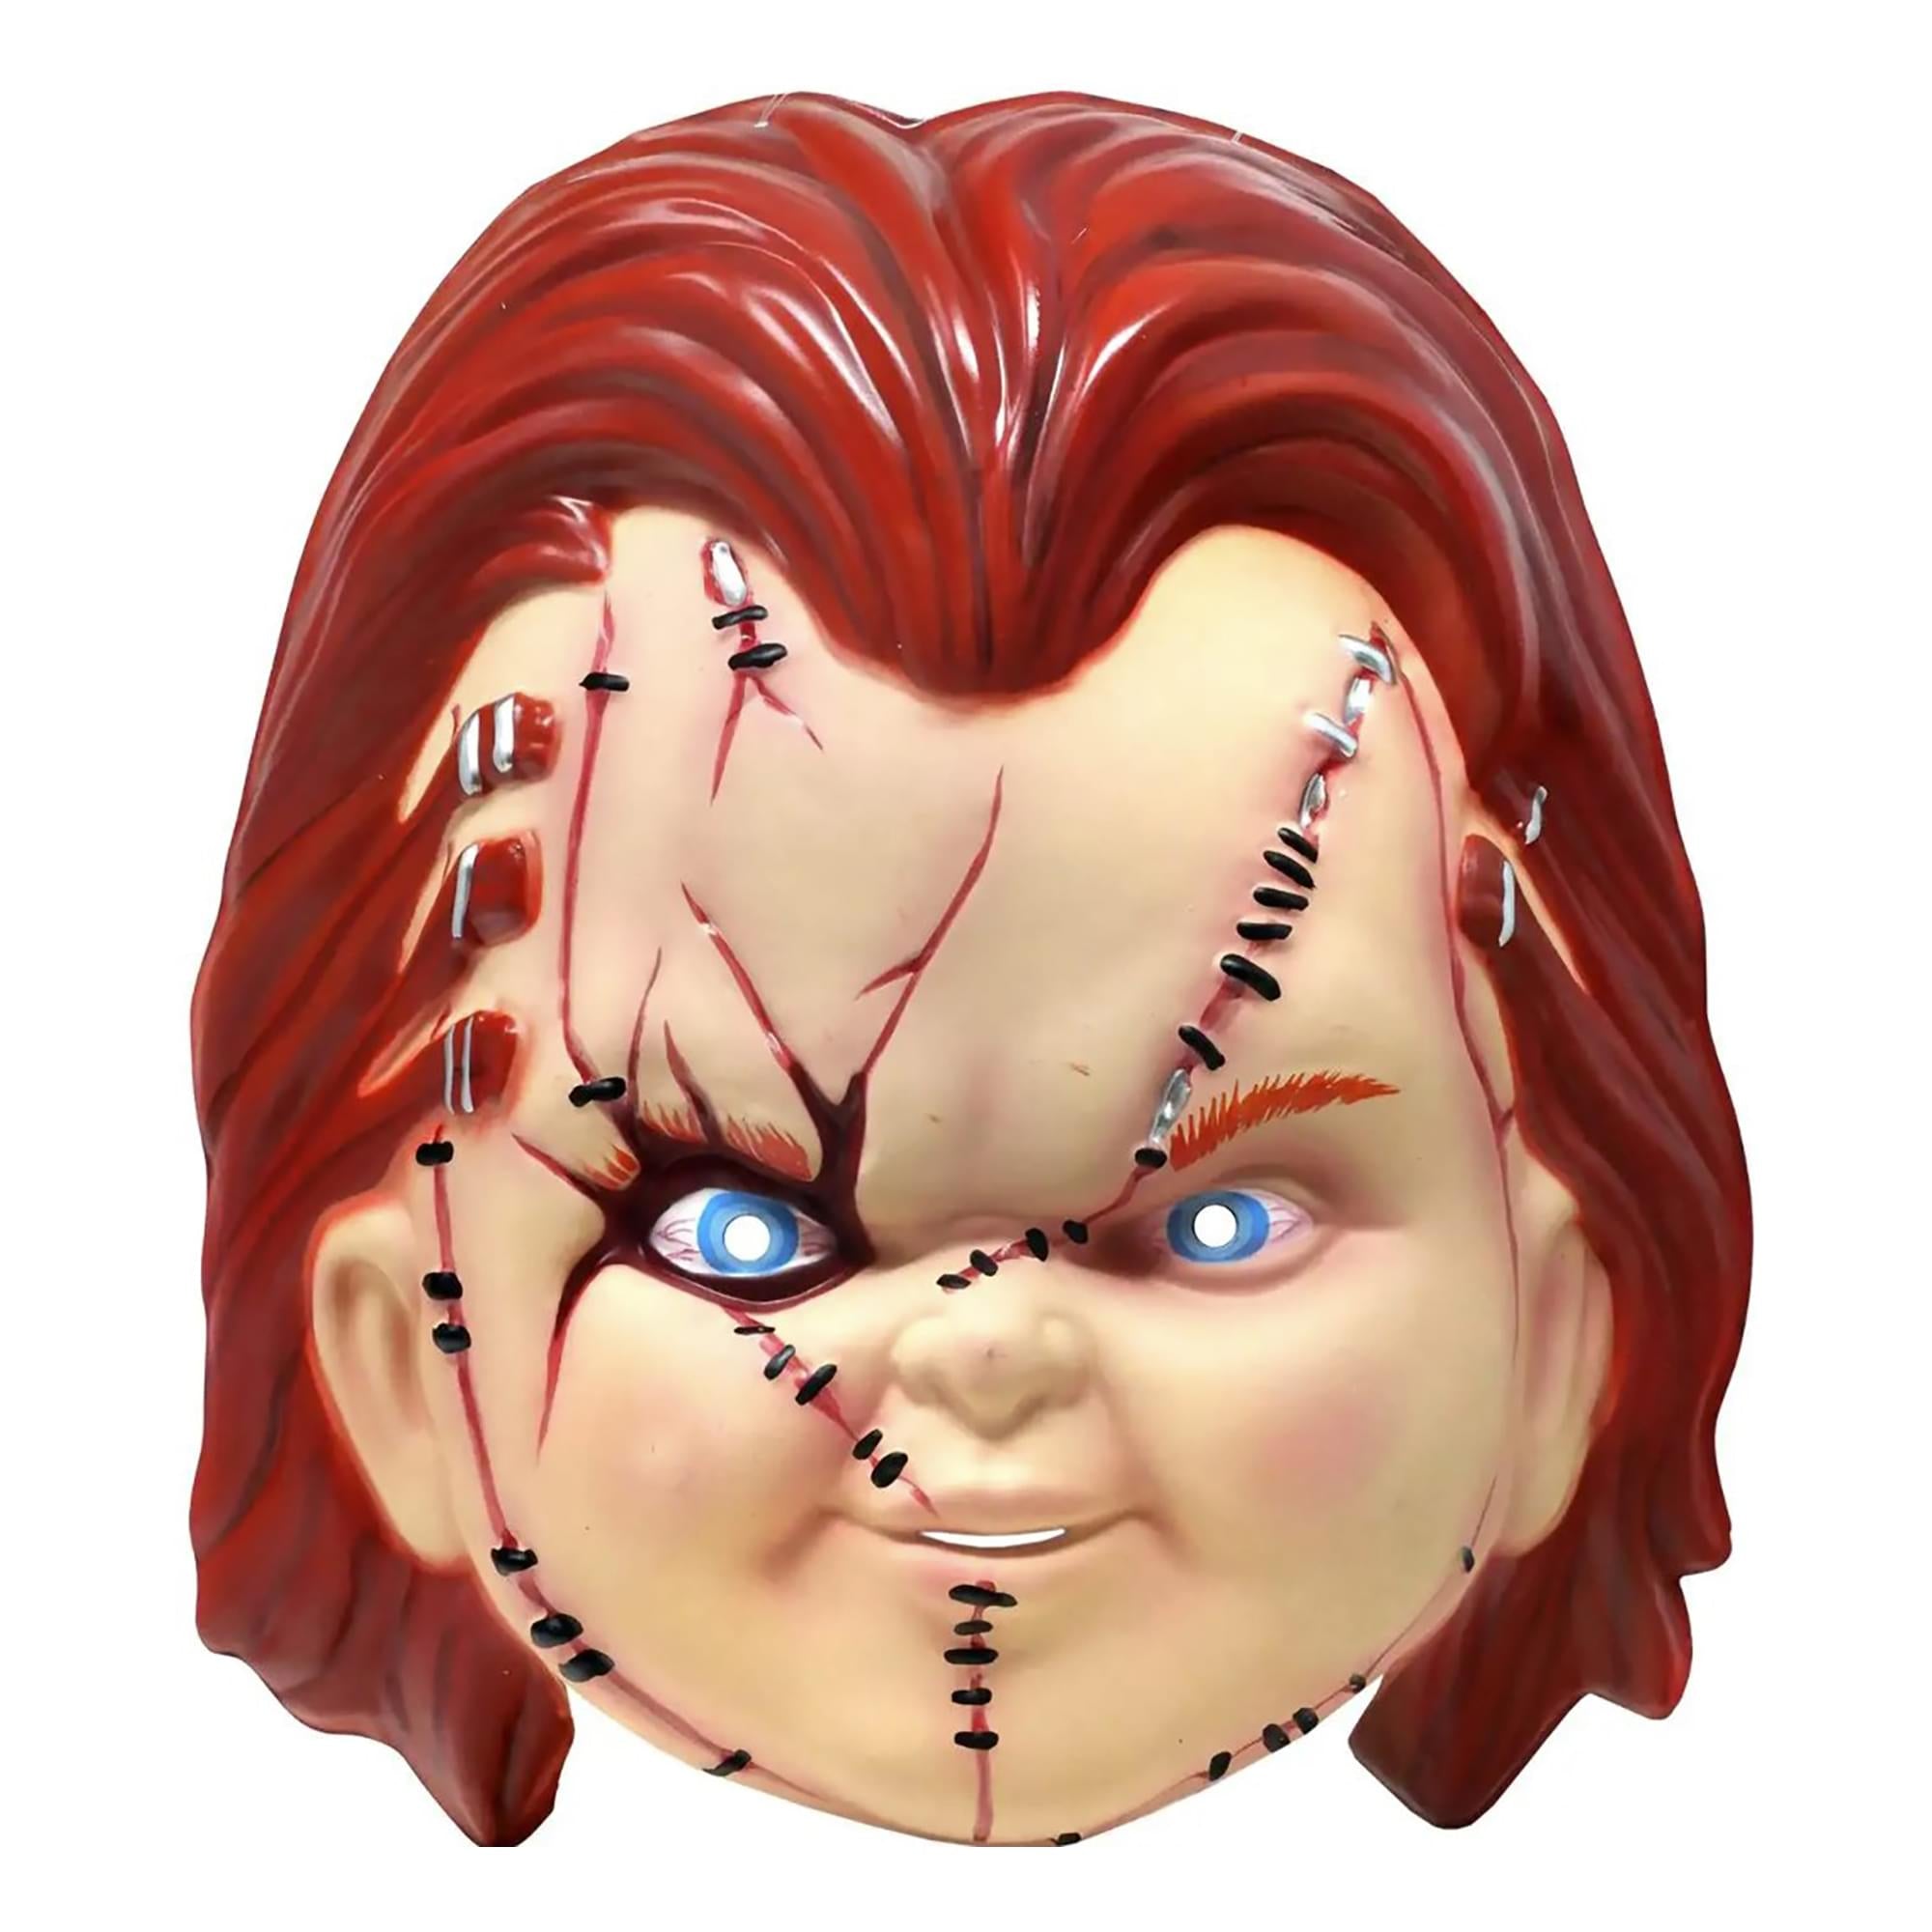 Photos - Fancy Dress Seed of Chucky Vacuform Chucky Costume Mask TOT-TGUS127-C 